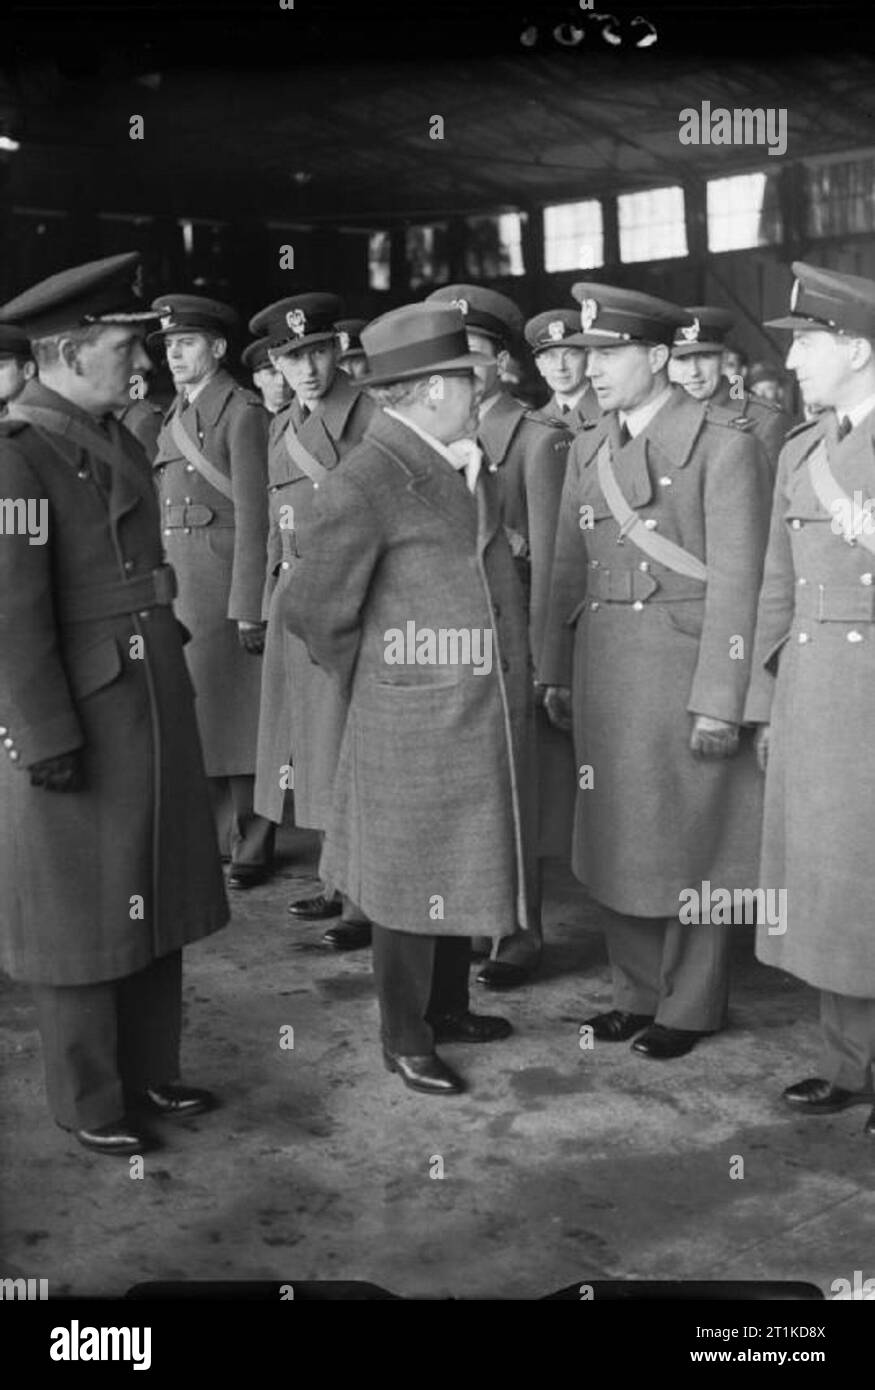 The Polish Air Force in the United Kingdom, 1939-1945. The Secretary of State for War, Sir Kingsley Wood, talking with newly-arrived Polish Air Force officers in a hangar at Eastchurch, Kent, the receiving centre for PAF personnel in the United Kingdom. Stock Photo